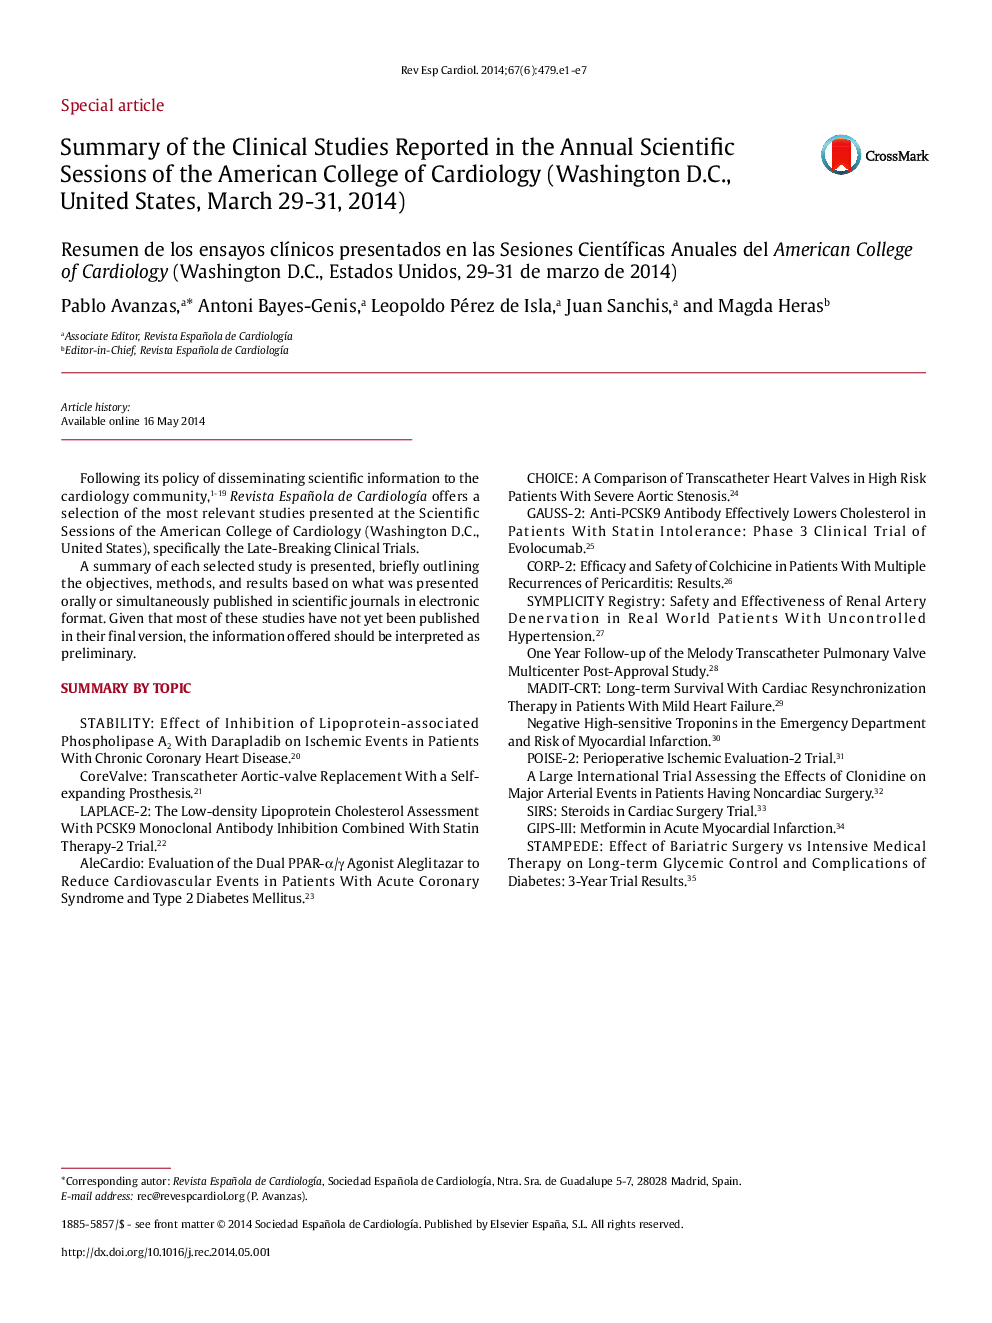 Summary of the Clinical Studies Reported in the Annual Scientific Sessions of the American College of Cardiology (Washington D.C., United States, March 29-31, 2014)